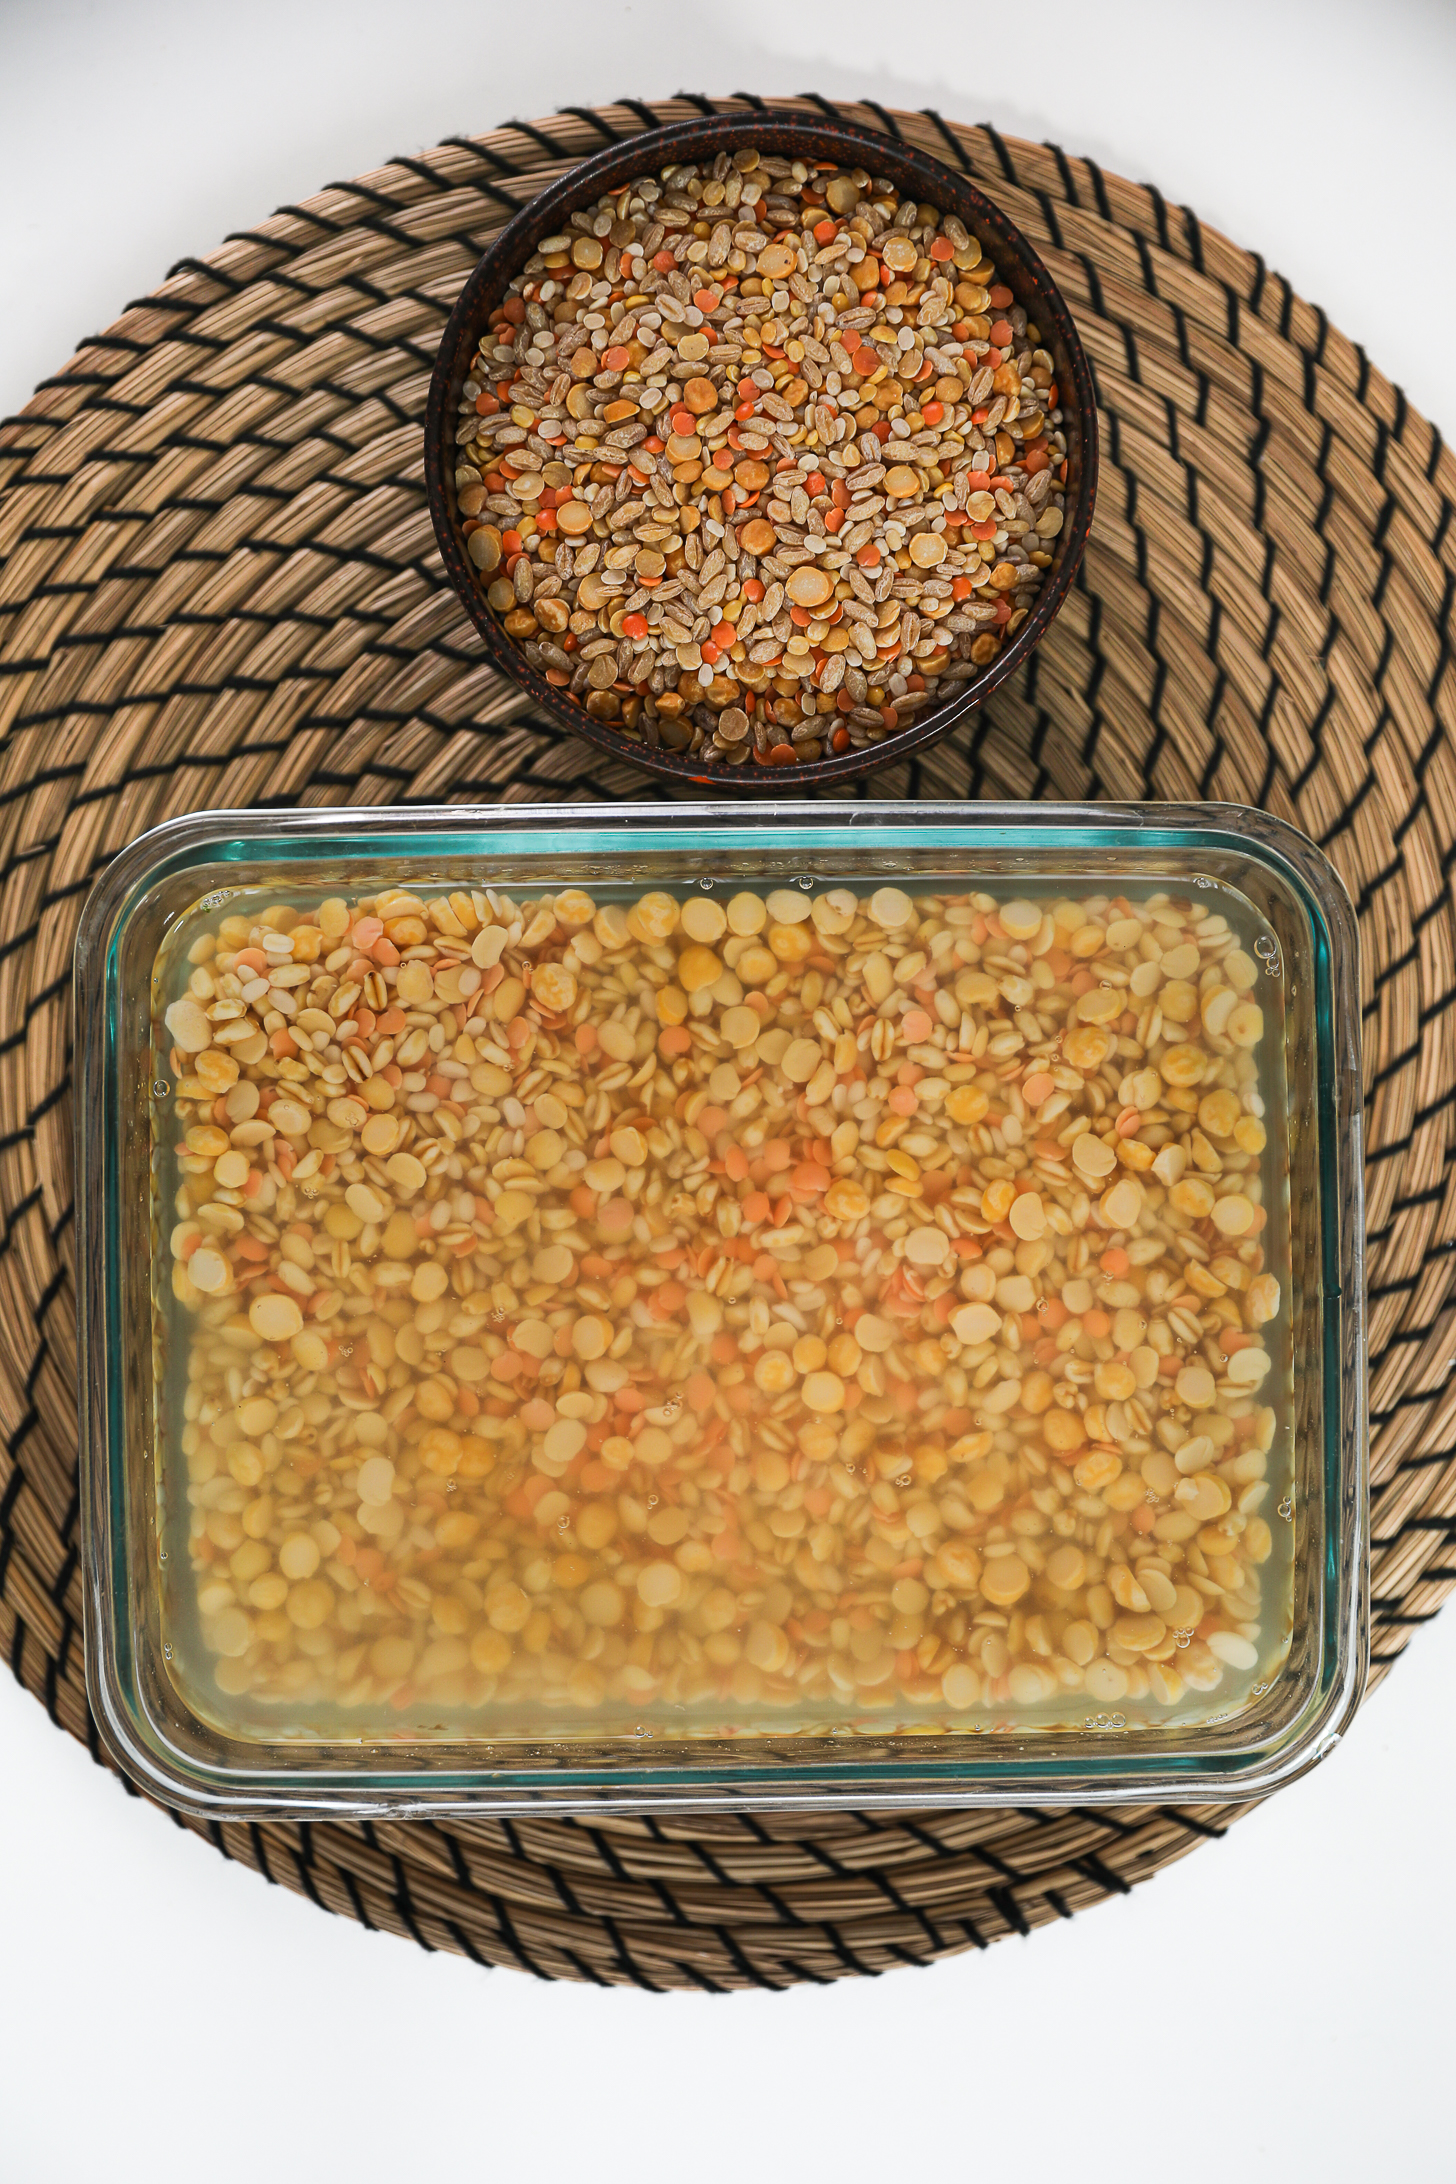 Two containers of lentils and wheat on a round straw mat: one soaked and the other dry.